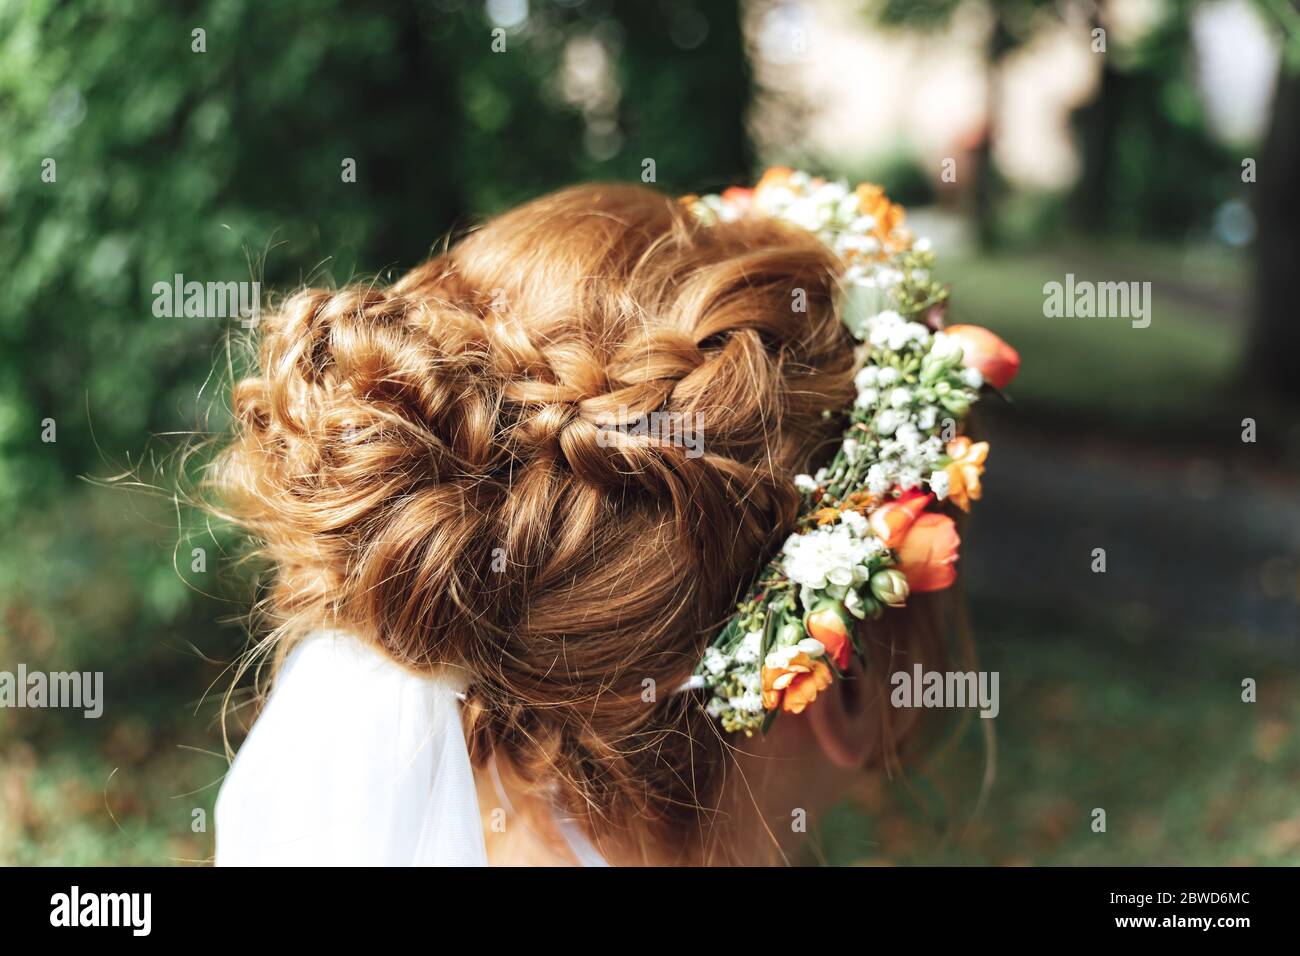 Bride hairstyle close up. Art of hairstylist with bridal flower headpiece. Outdoor background. Wedding day concept. Stock Photo